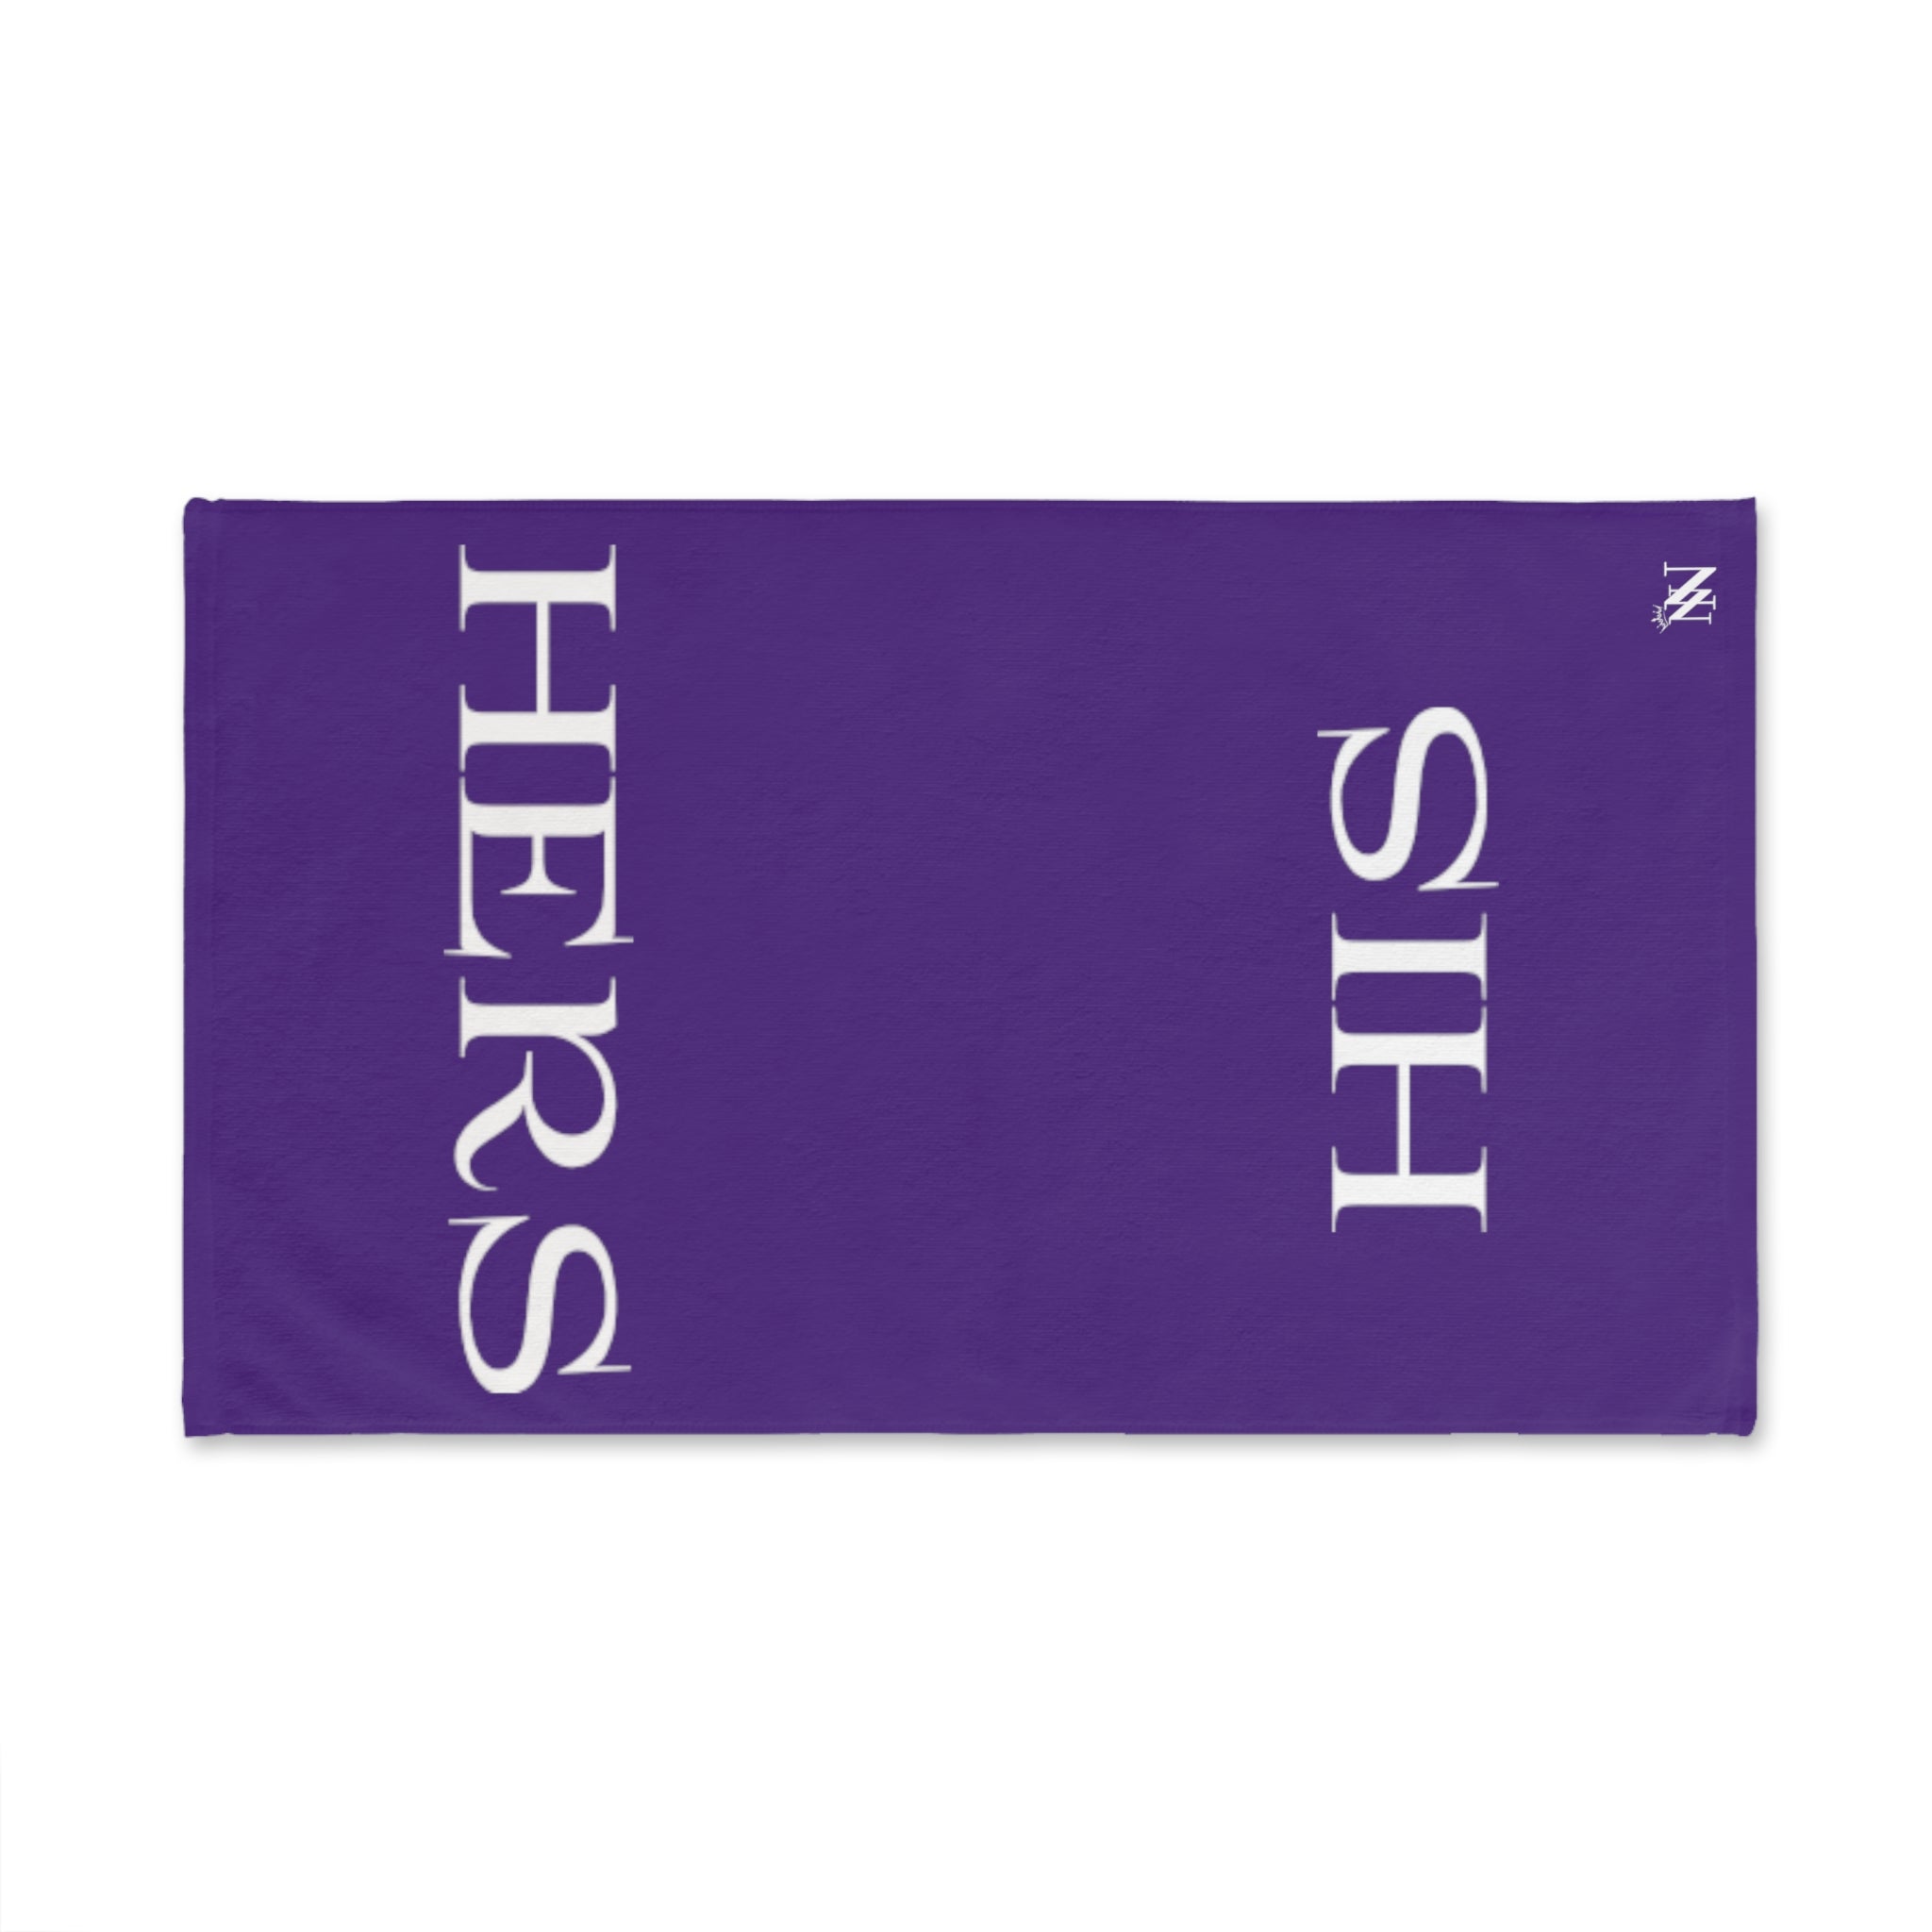 His Hers | Gifts for Boyfriend, Funny Towel Romantic Gift for Wedding Couple Fiance First Year Anniversary Valentines, Party Gag Gifts, Joke Humor Cloth for Husband Men BF NECTAR NAPKINS